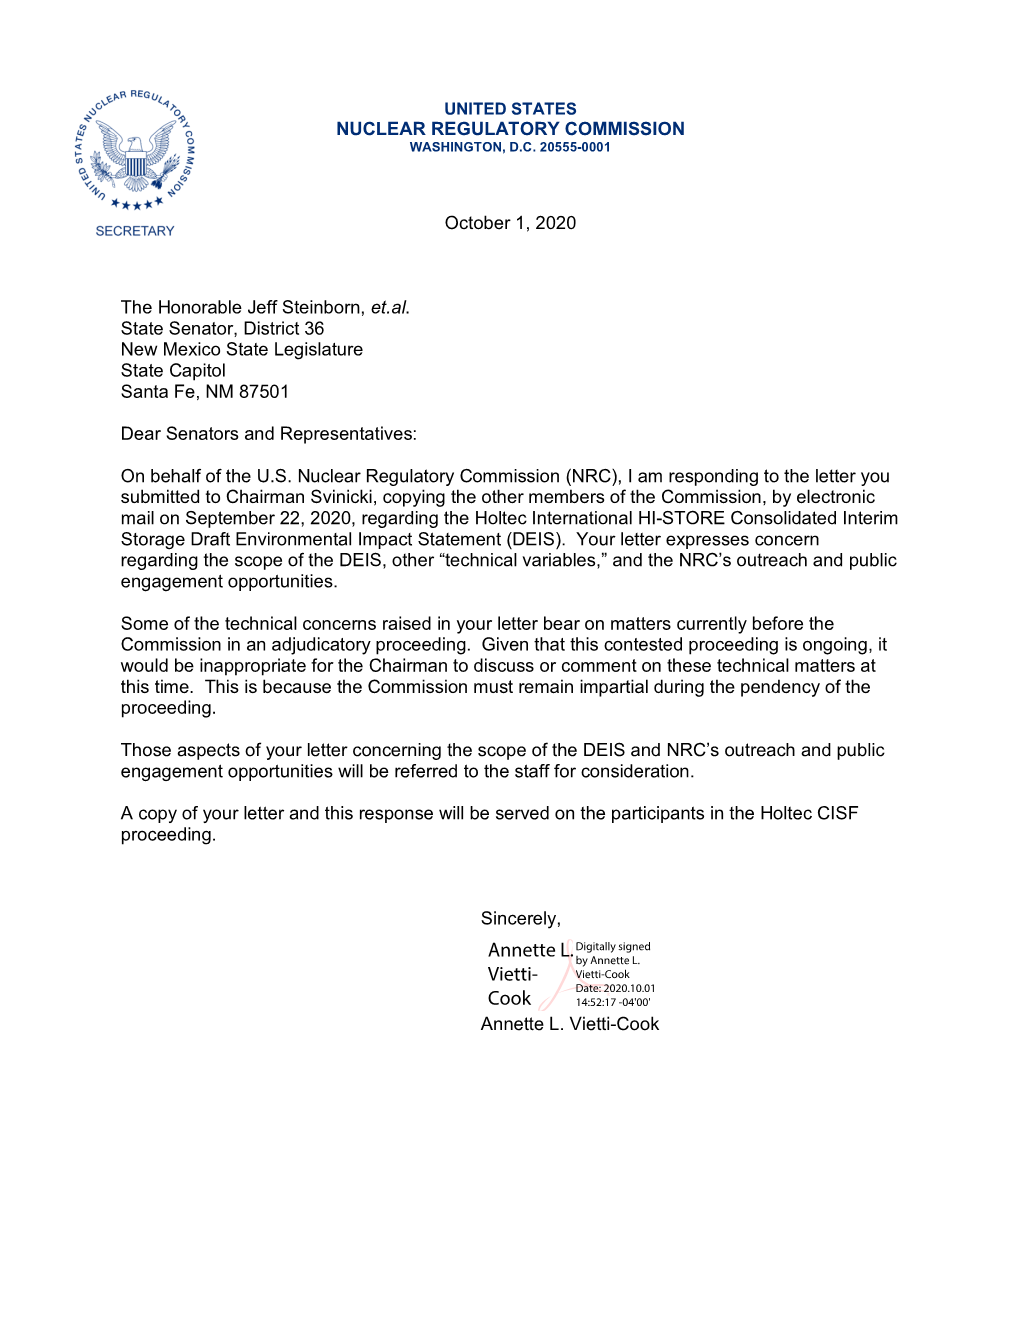 Letter from NRC Secretary Annette Vietti-Cook to the Honorable Jeff Steinborn, Et.Al